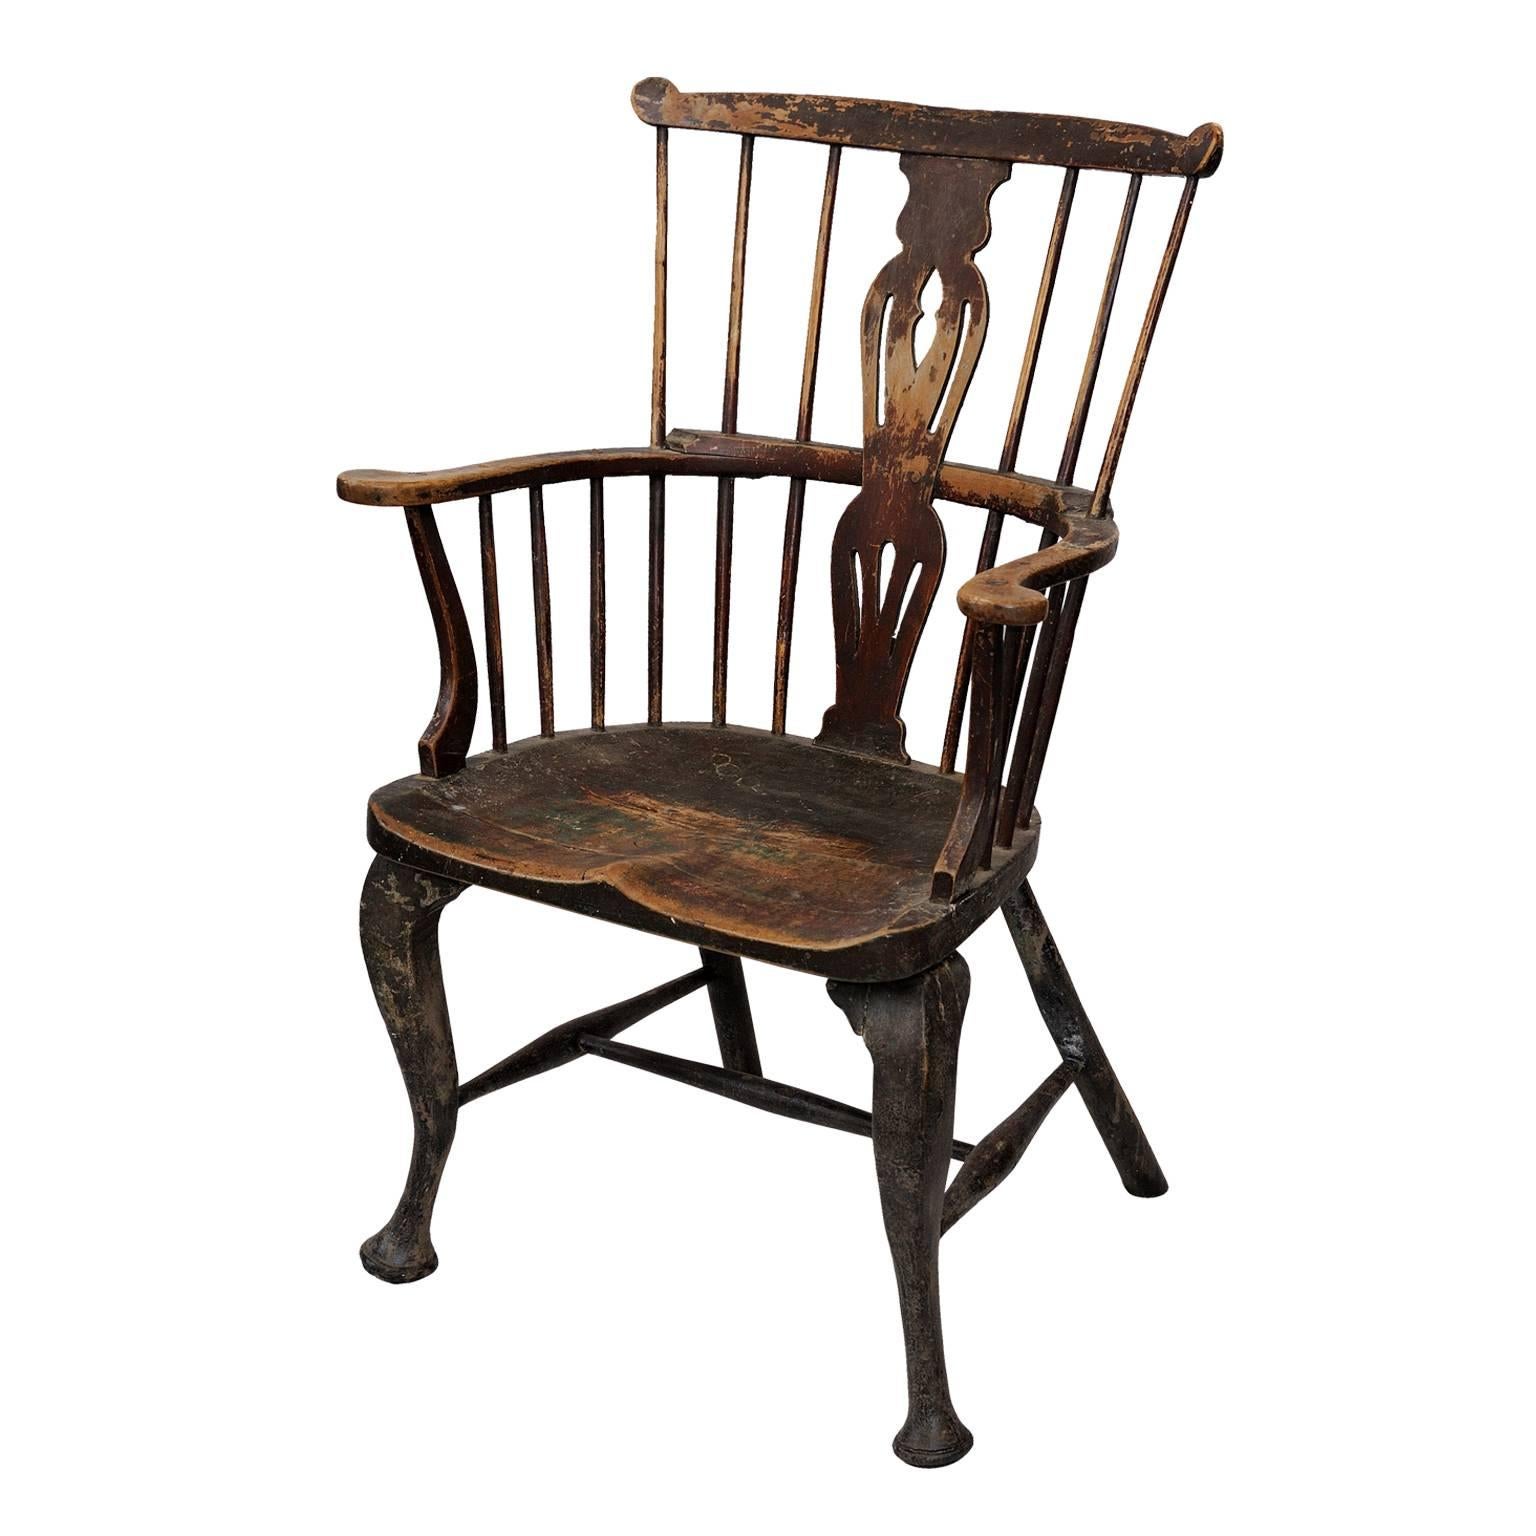 This is a rather beautiful English mid-18th century George III 'Thames Valley' Windsor chair of great proportions. The Chair, made from beech and elm, retains traces of its original paint and the legs have been historically re-tipped, possibly in